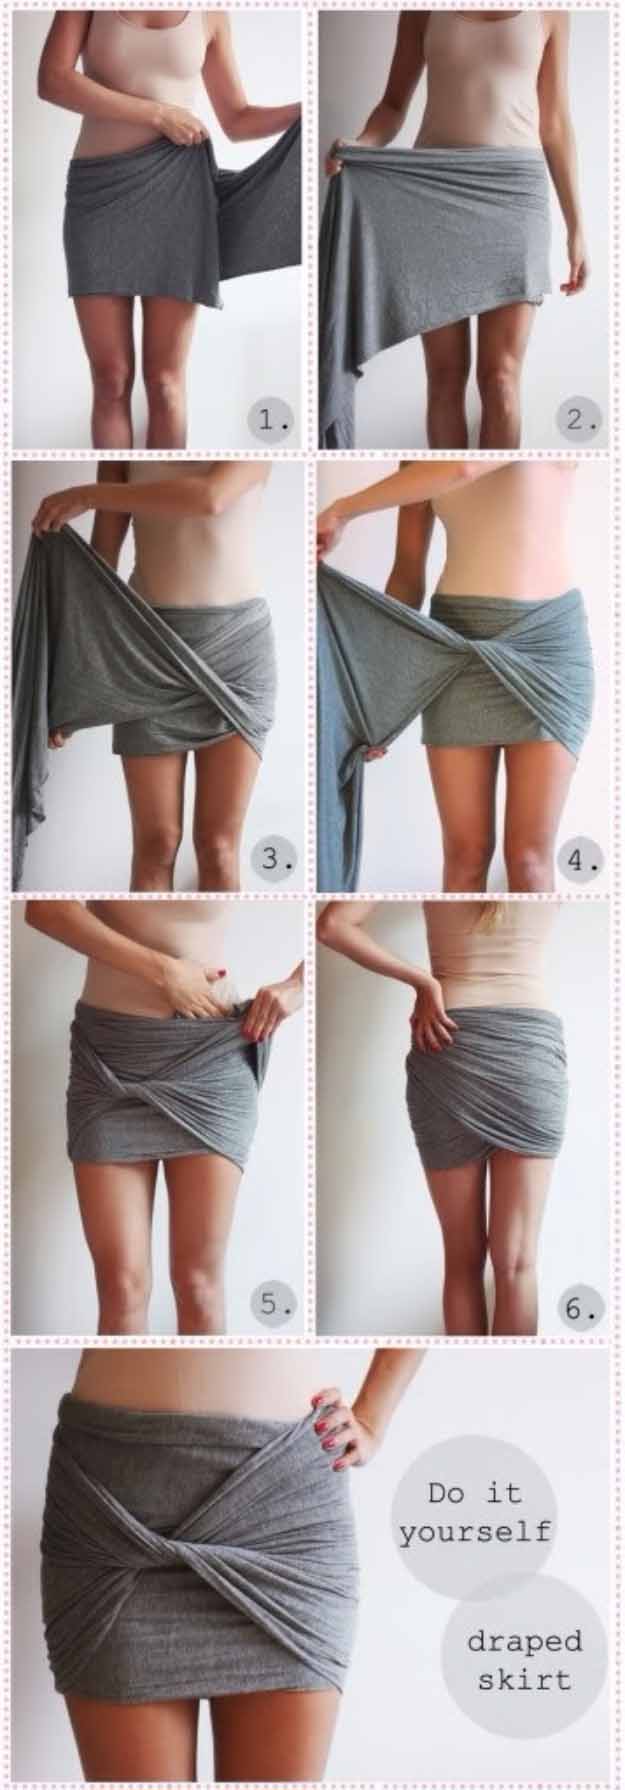 Cool Crafts You Can Make for Less than 5 Dollars | Cheap DIY Projects Ideas for Teens, Tweens, Kids and Adults | Wrap a Scarf to Make a Draped Skirt #teencrafts #cheapcrafts #crafts/